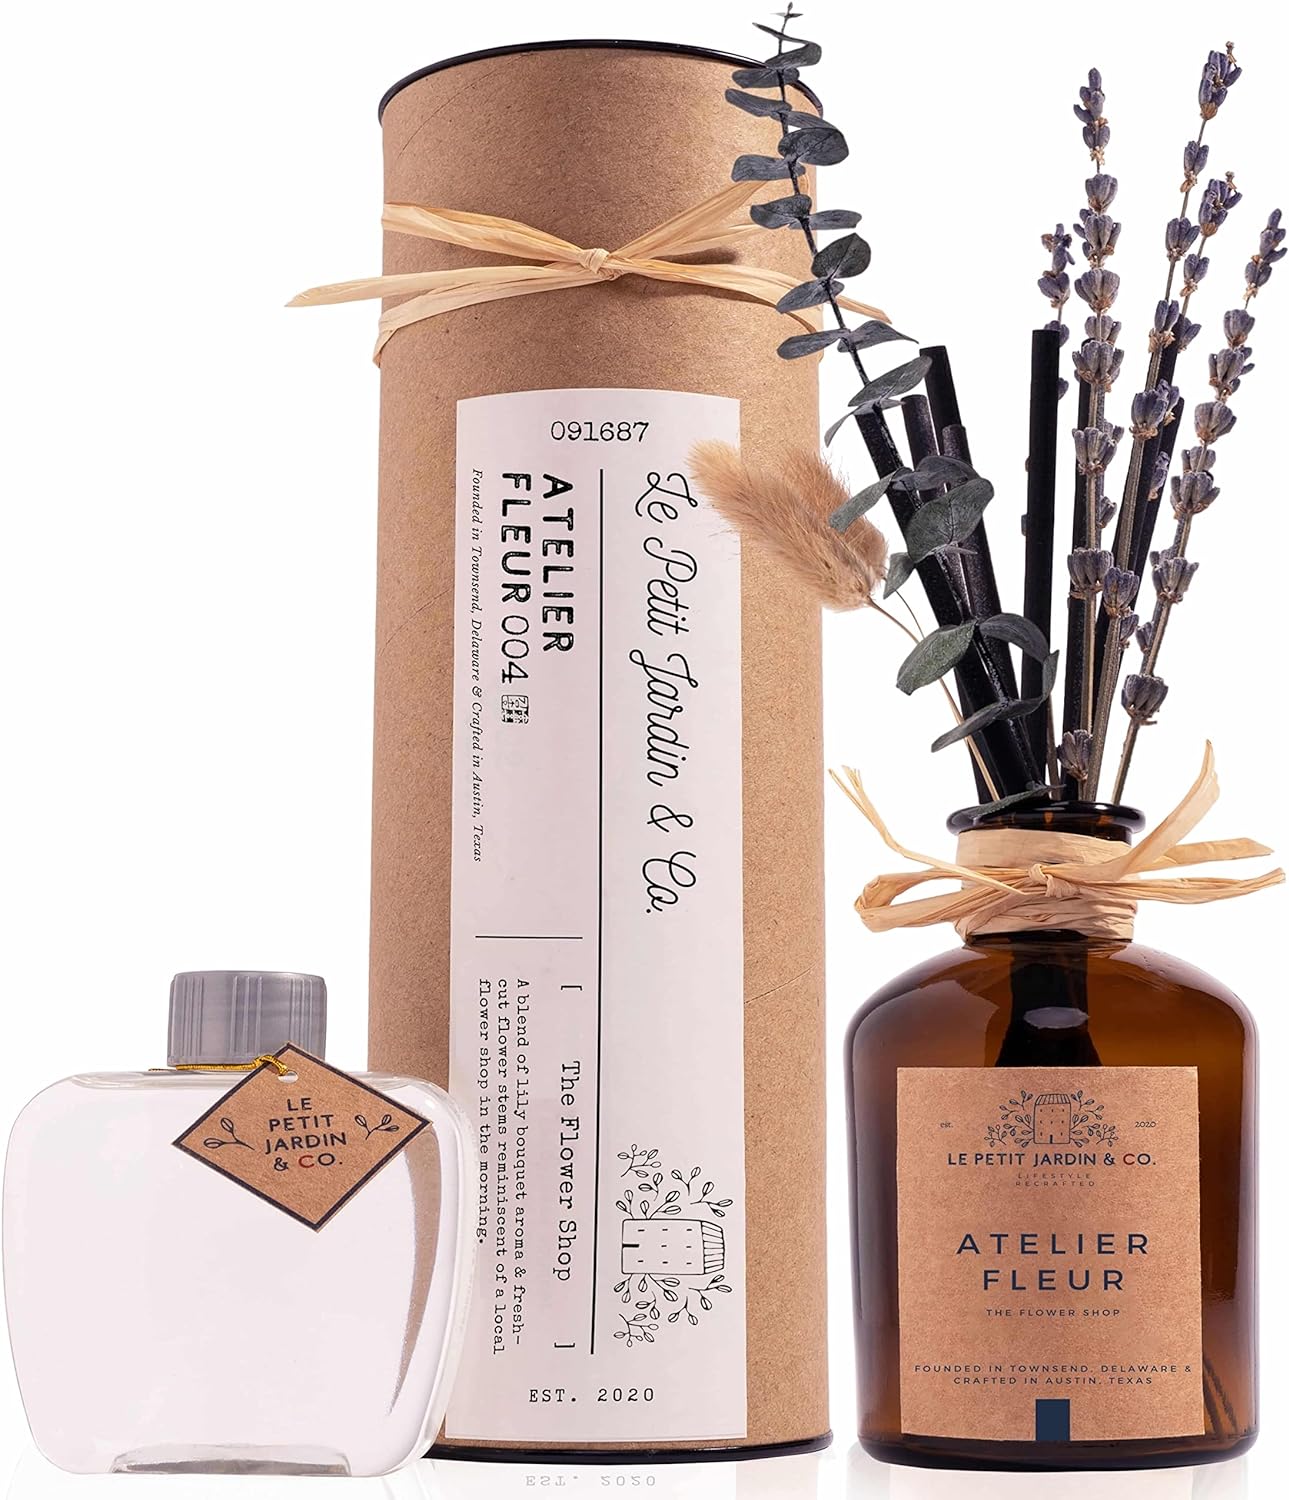 Le Petit Jardin & Co. Real Preserved Dried Flower Reed Diffuser Oil Scented Stick Fragrance Gift Set for Rustic Farmhouse Home Office Desk Bathroom Decor (The Flower Shop, Lavender & Eucalyptus)